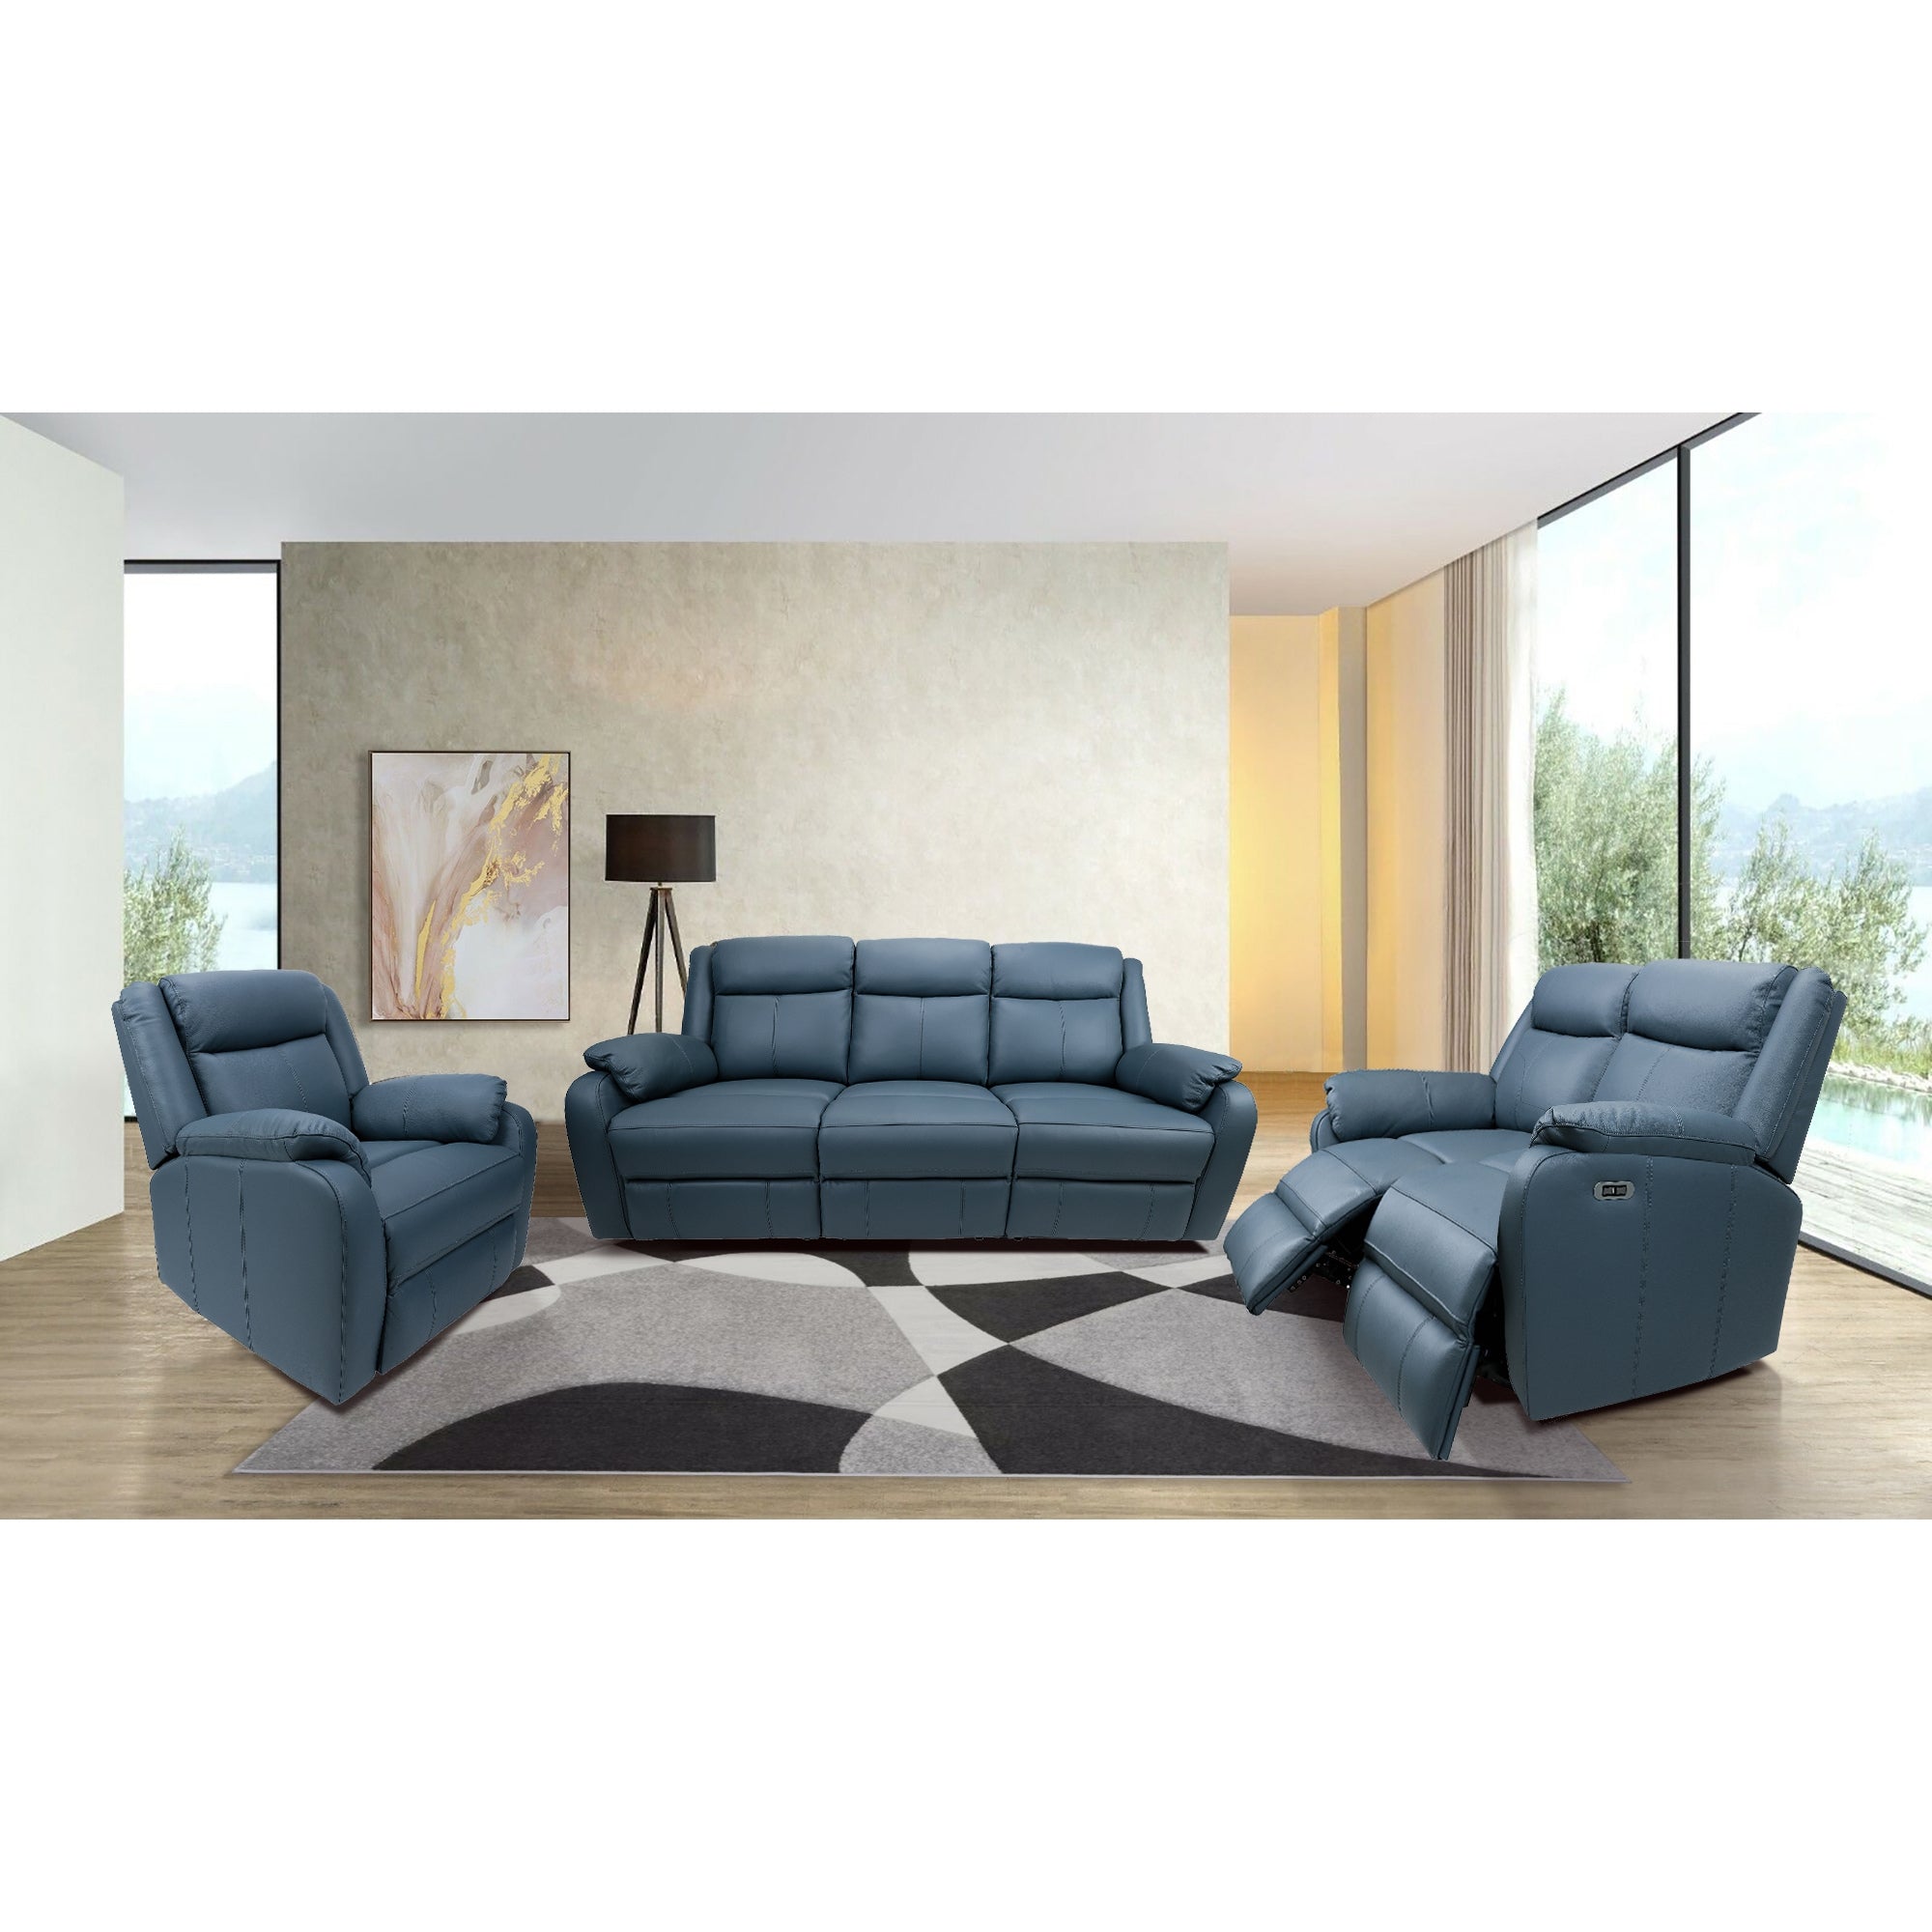 Bella 1 Seater Electric Recliner Genuine Leather Upholstered Lounge - Blue